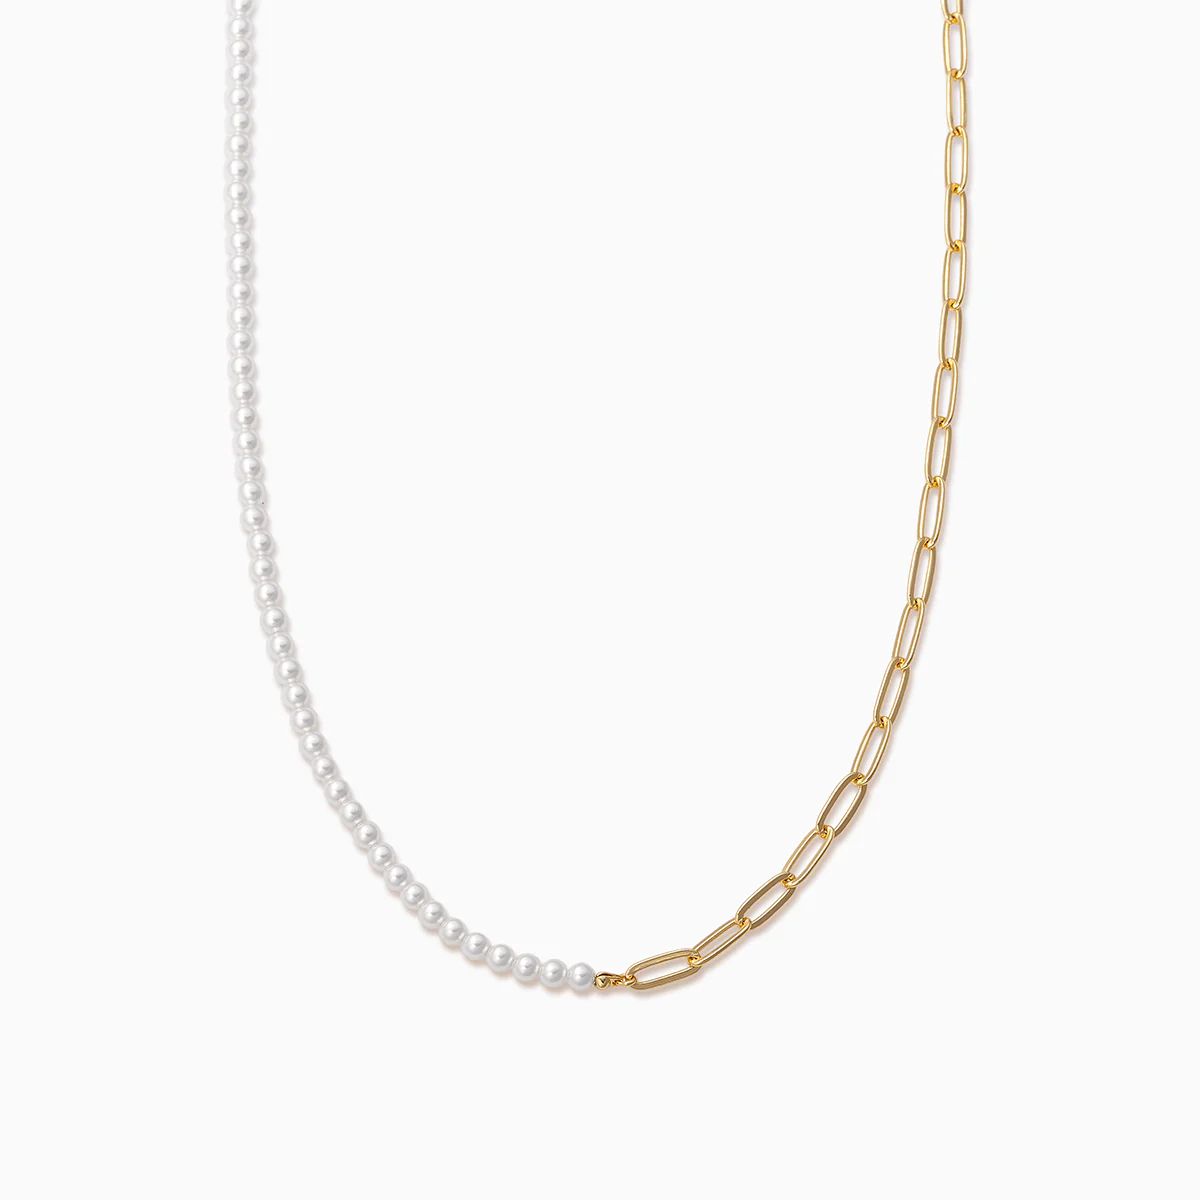 Split Personality Pearl Necklace | Uncommon James